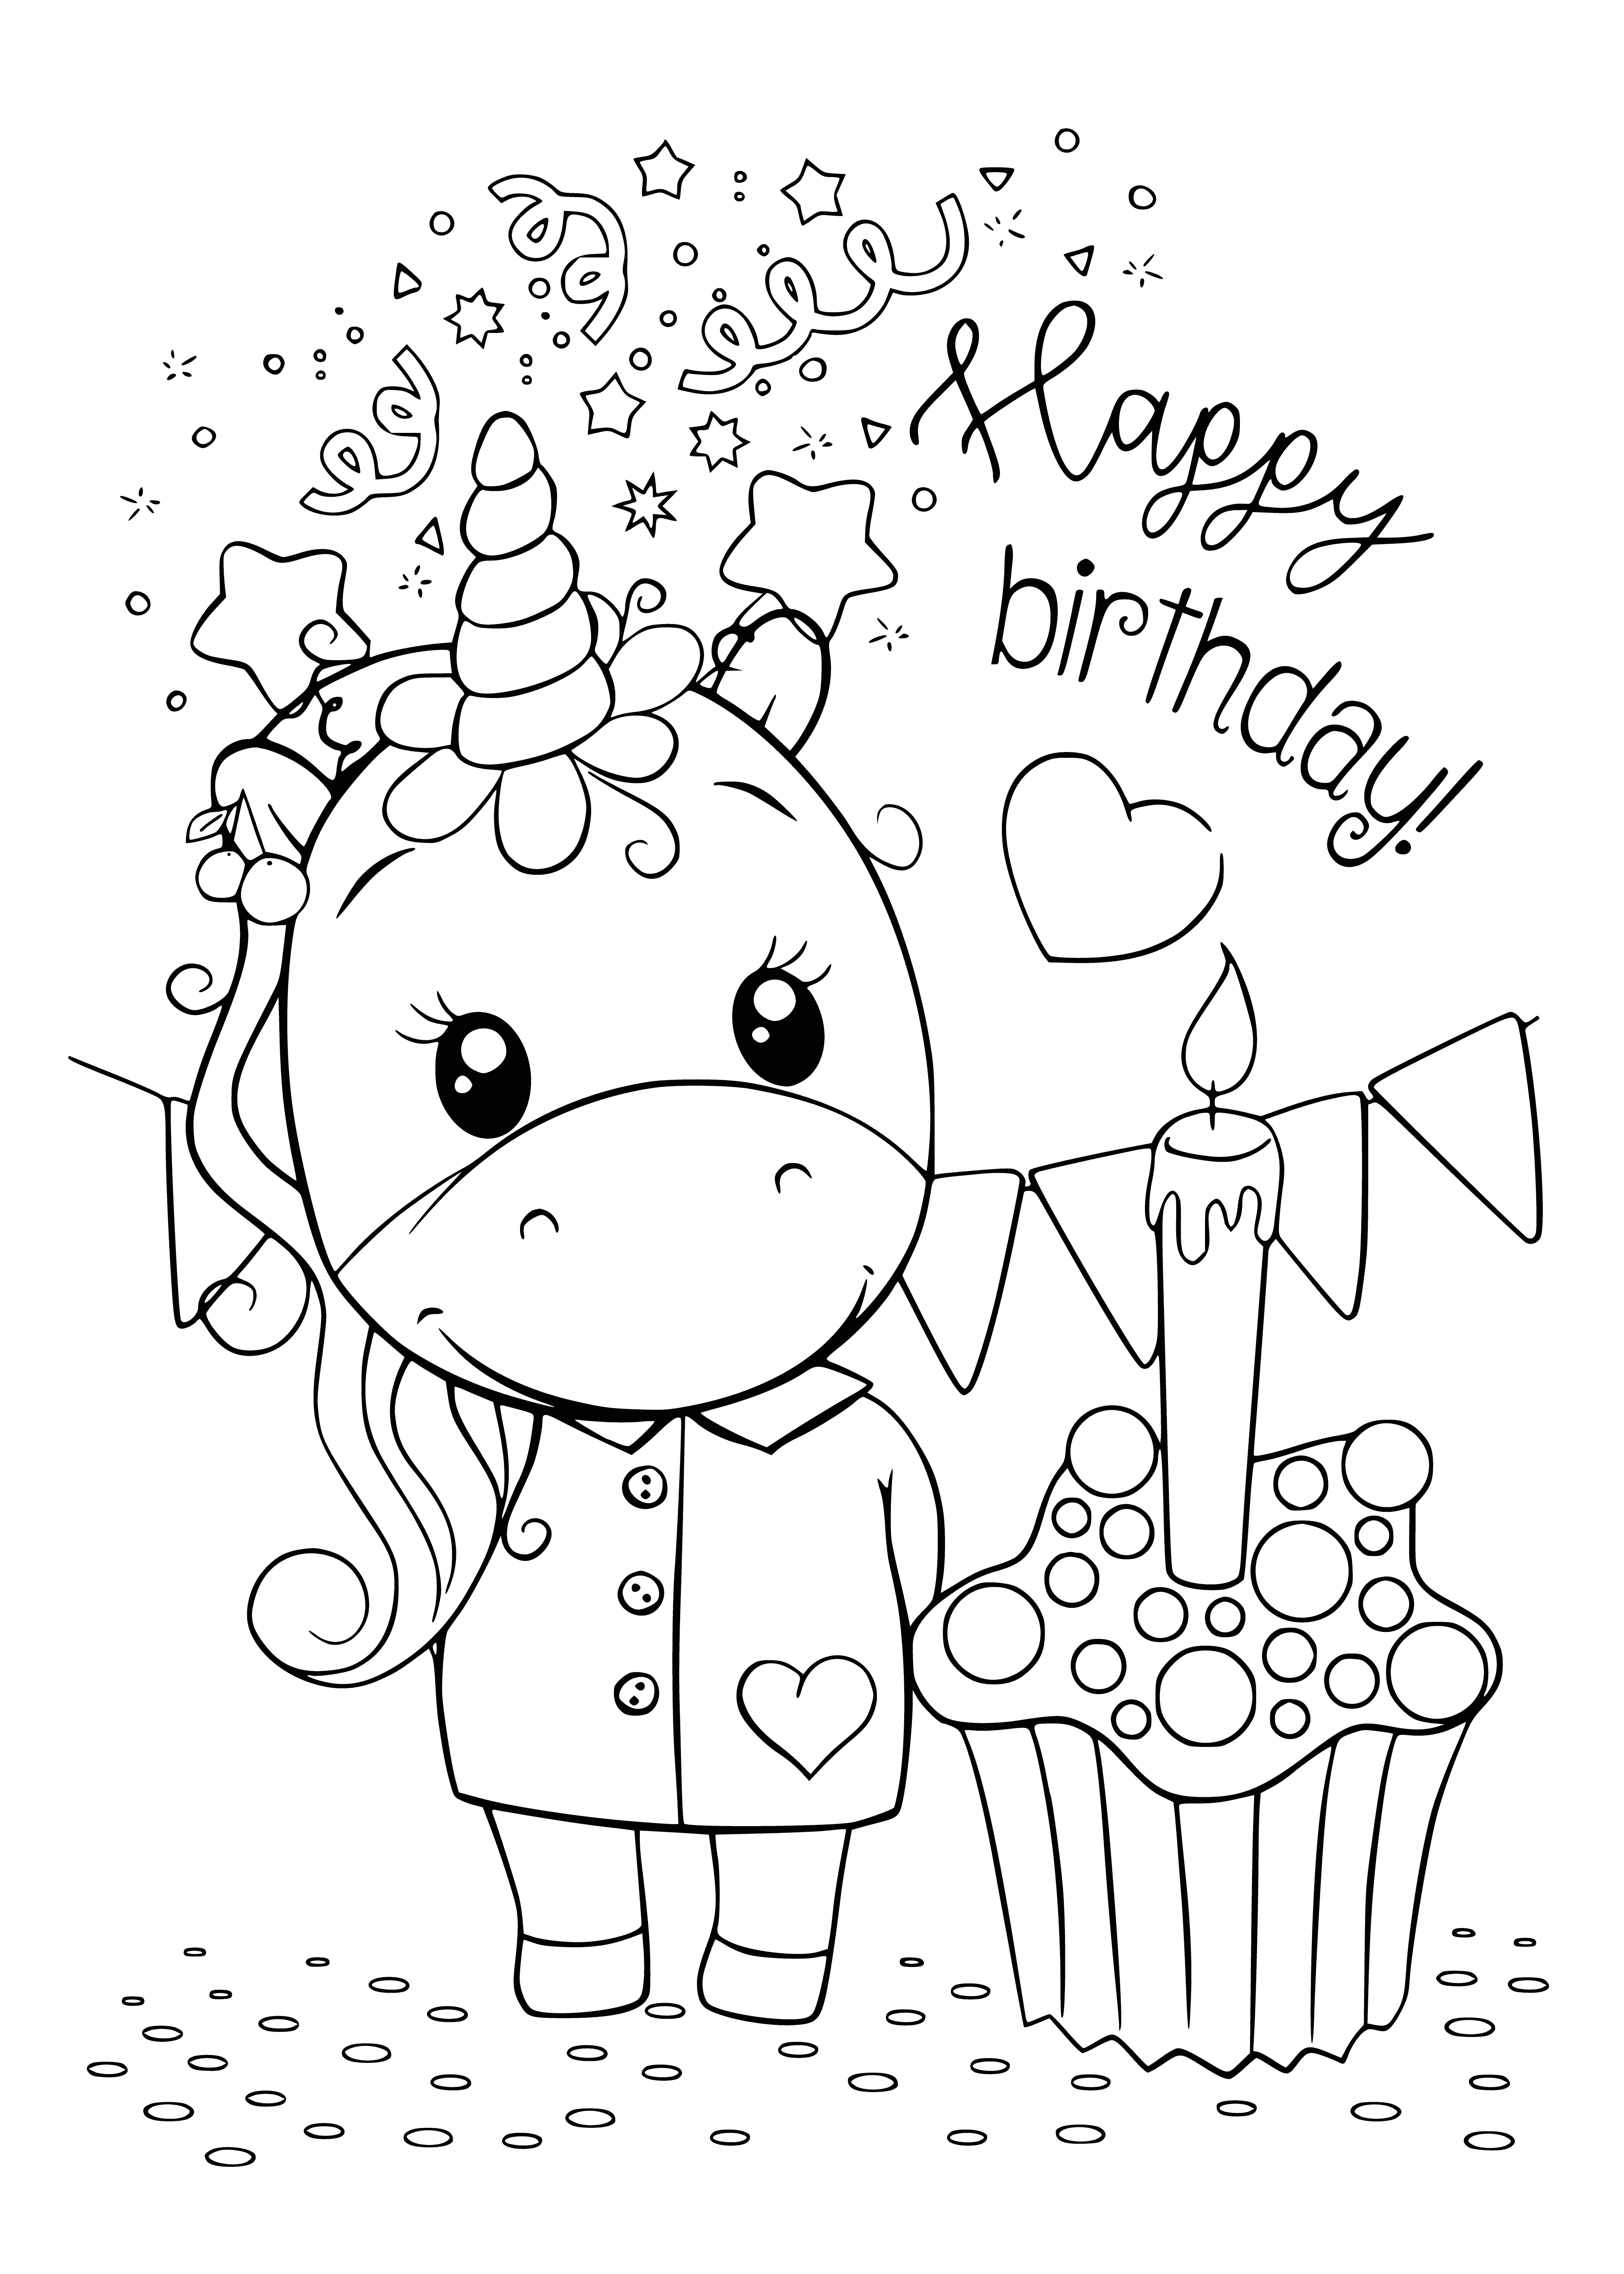 Happy birthday! coloring page